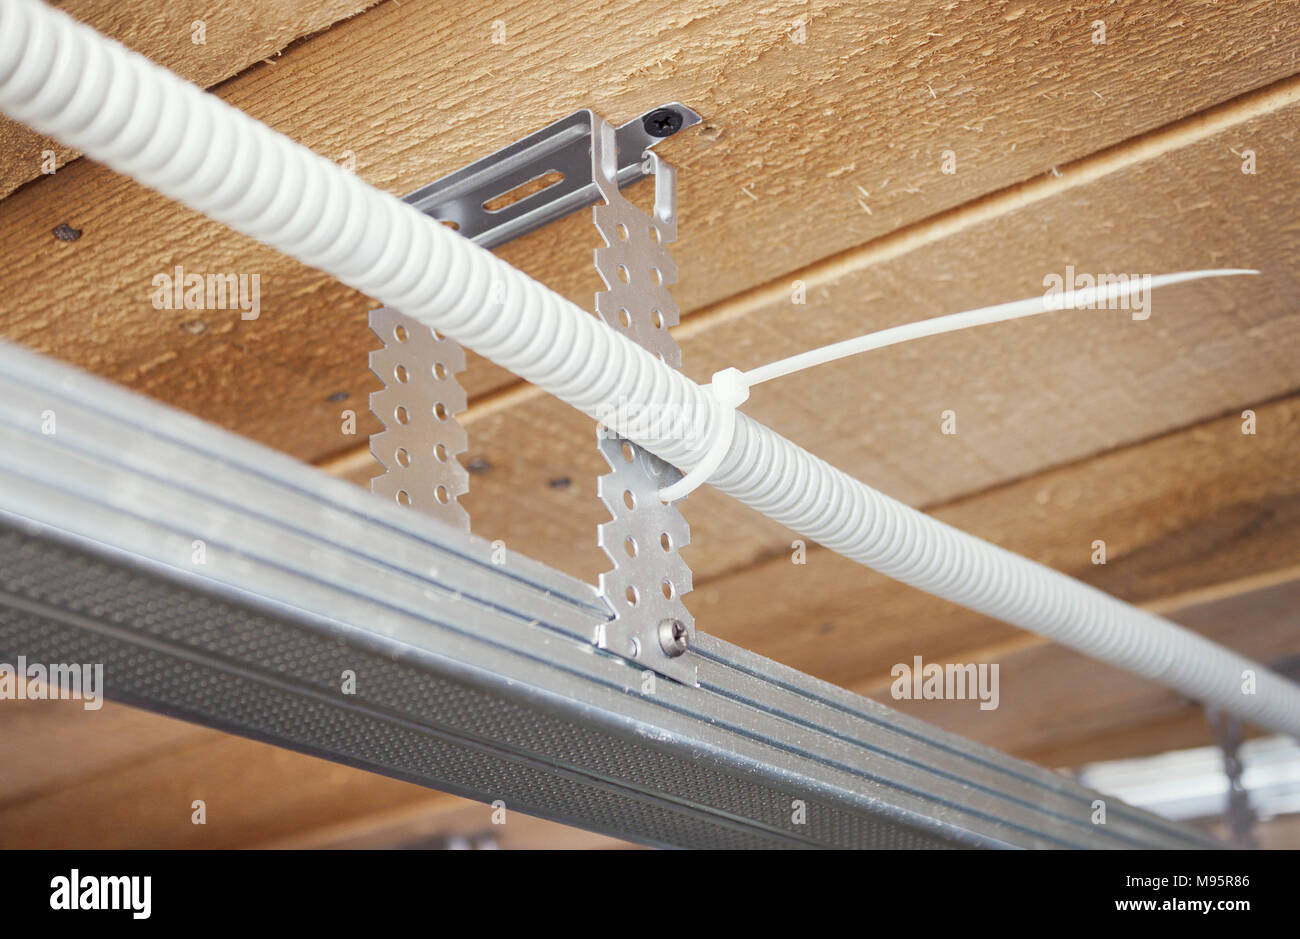 https://c8.alamy.com/comp/M95R86/electrical-wiring-is-laid-in-a-suspended-ceiling-M95R86.jpg